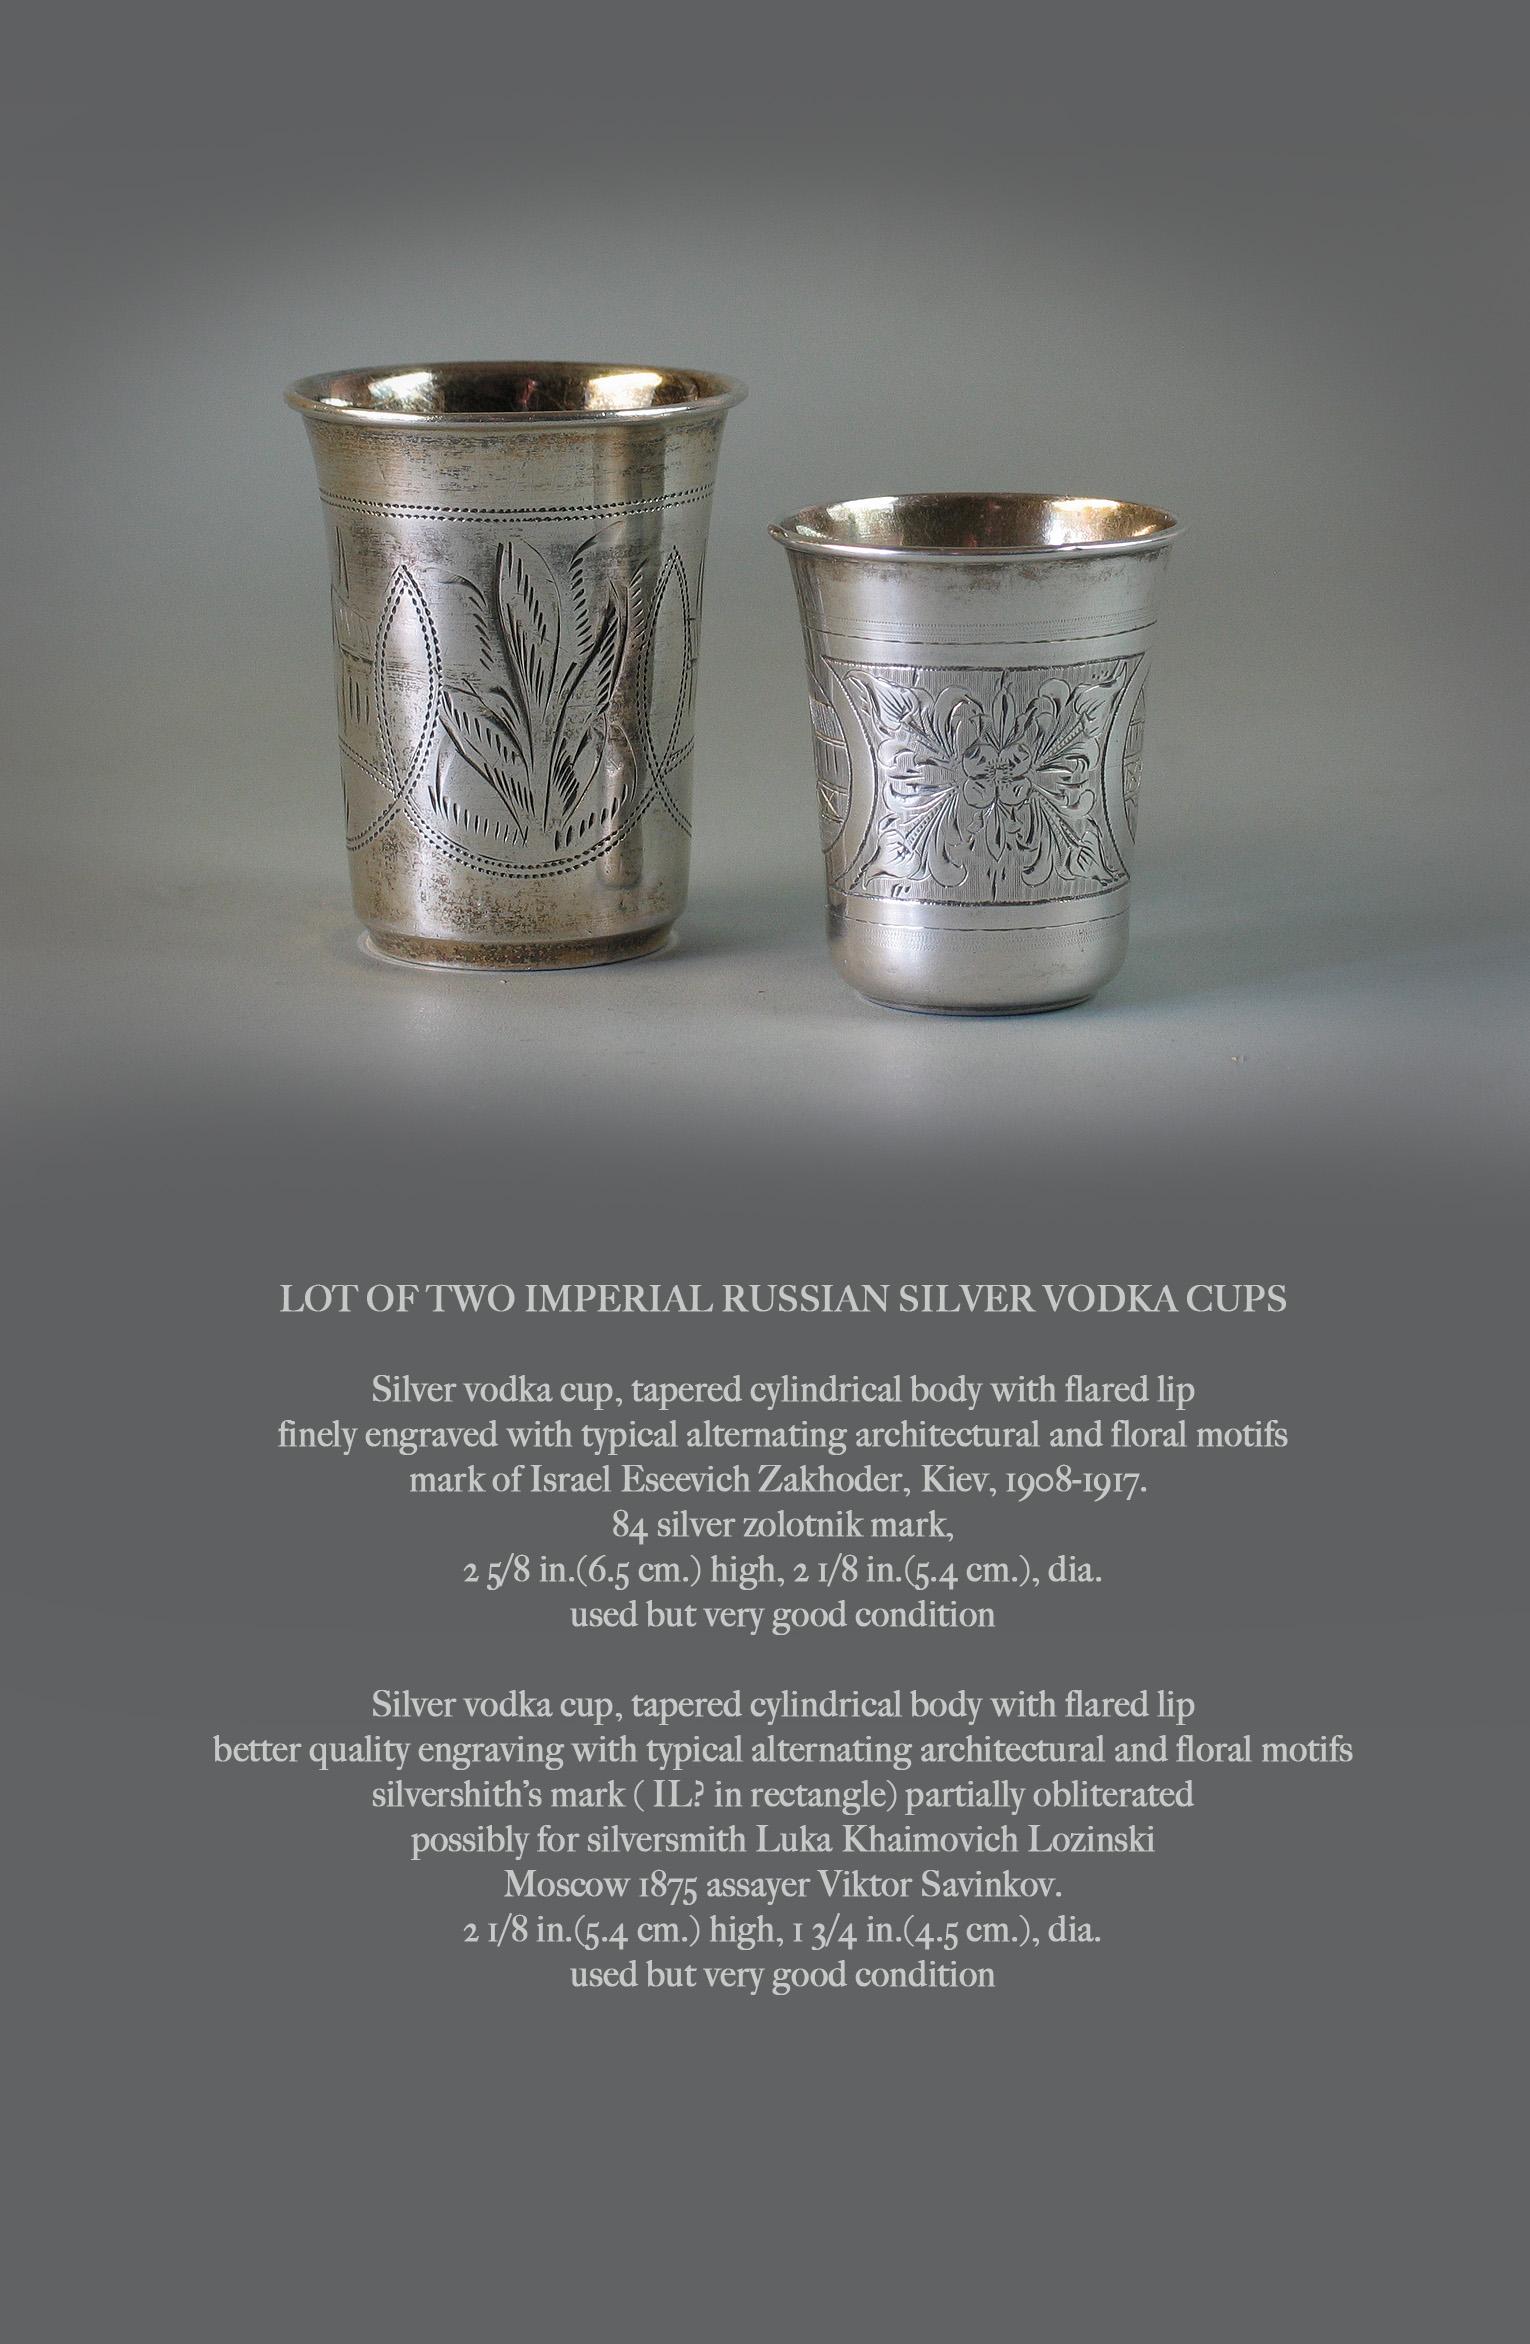 Lot of Two Imperial Russian Silver Vodka Cups

Silver vodka cup, tapered cylindrical body with flared lip
finely engraved with typical alternating architectural and floral motifs
mark of Israel Eseevich Zakhoder, Kiev, 1908-1917. 
84 silver